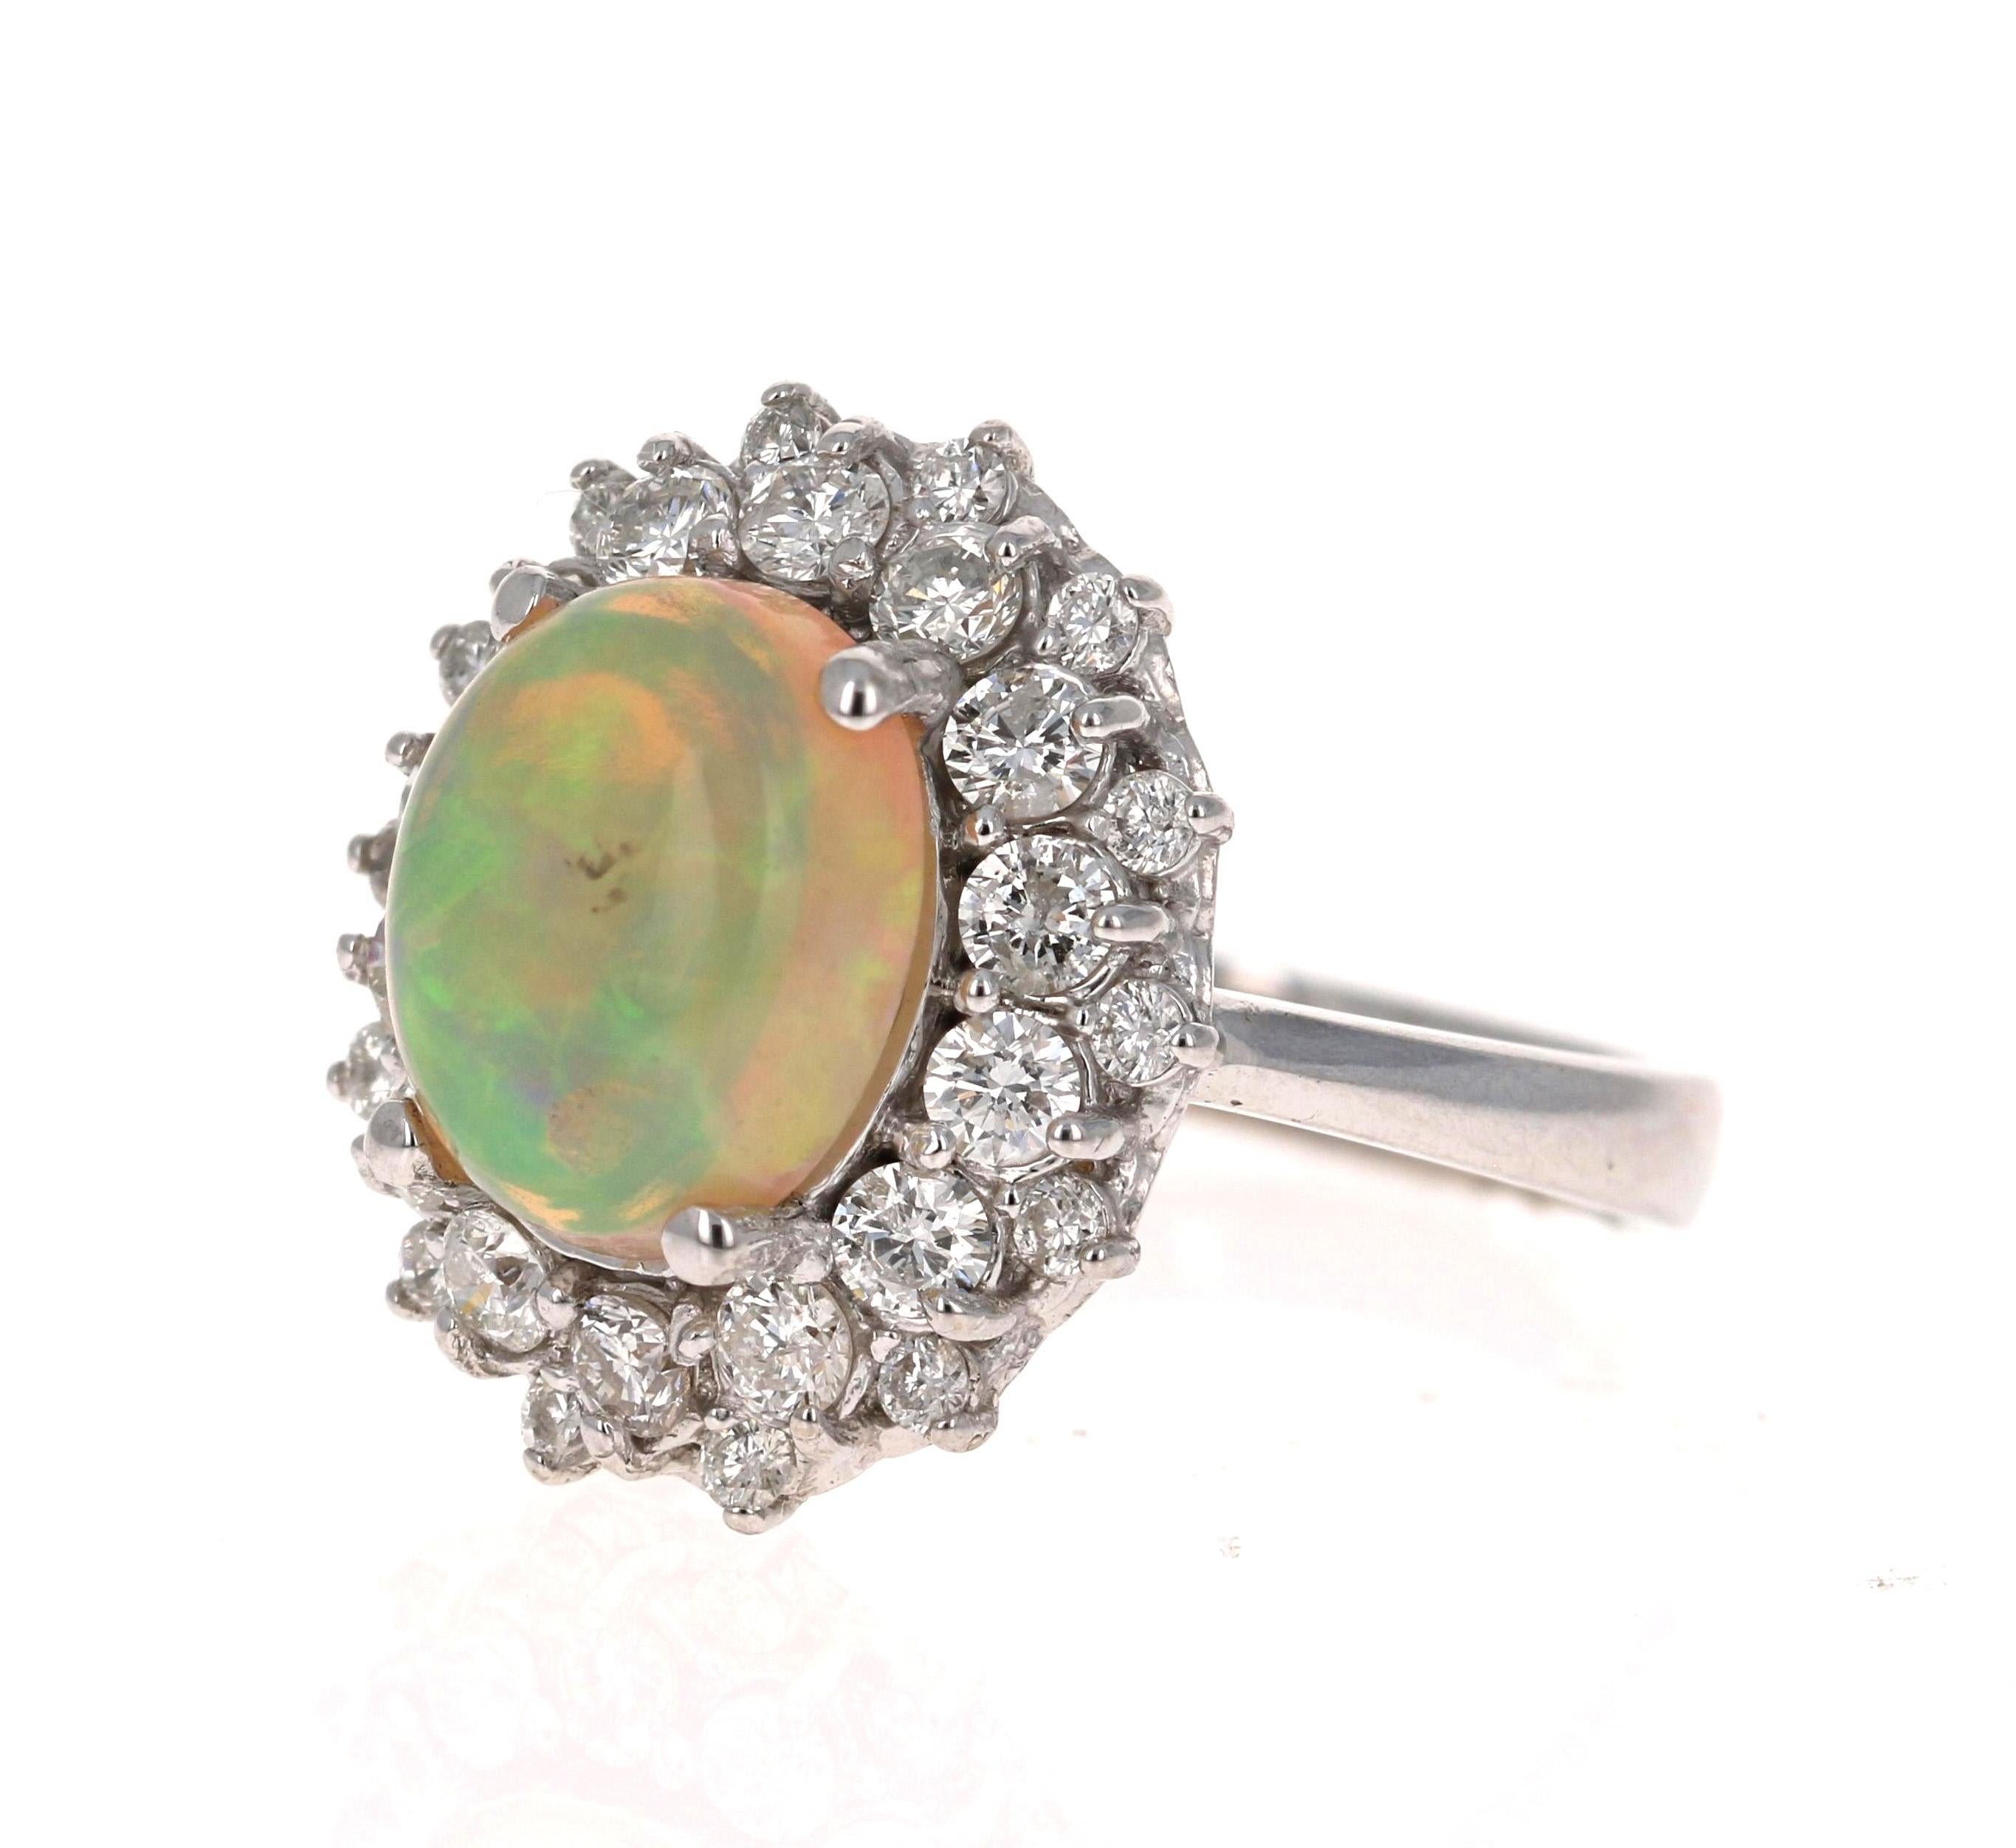 This ring has a gorgeous Oval Cut Opal in the center that weighs 2.72 Carats and has a clusterof 28 Round Cut Diamonds that weigh 1.32 Carats. The total carat weight of the ring is 4.04 Carats. 

The measurements of the Opal are 11mm x 13mm.

The